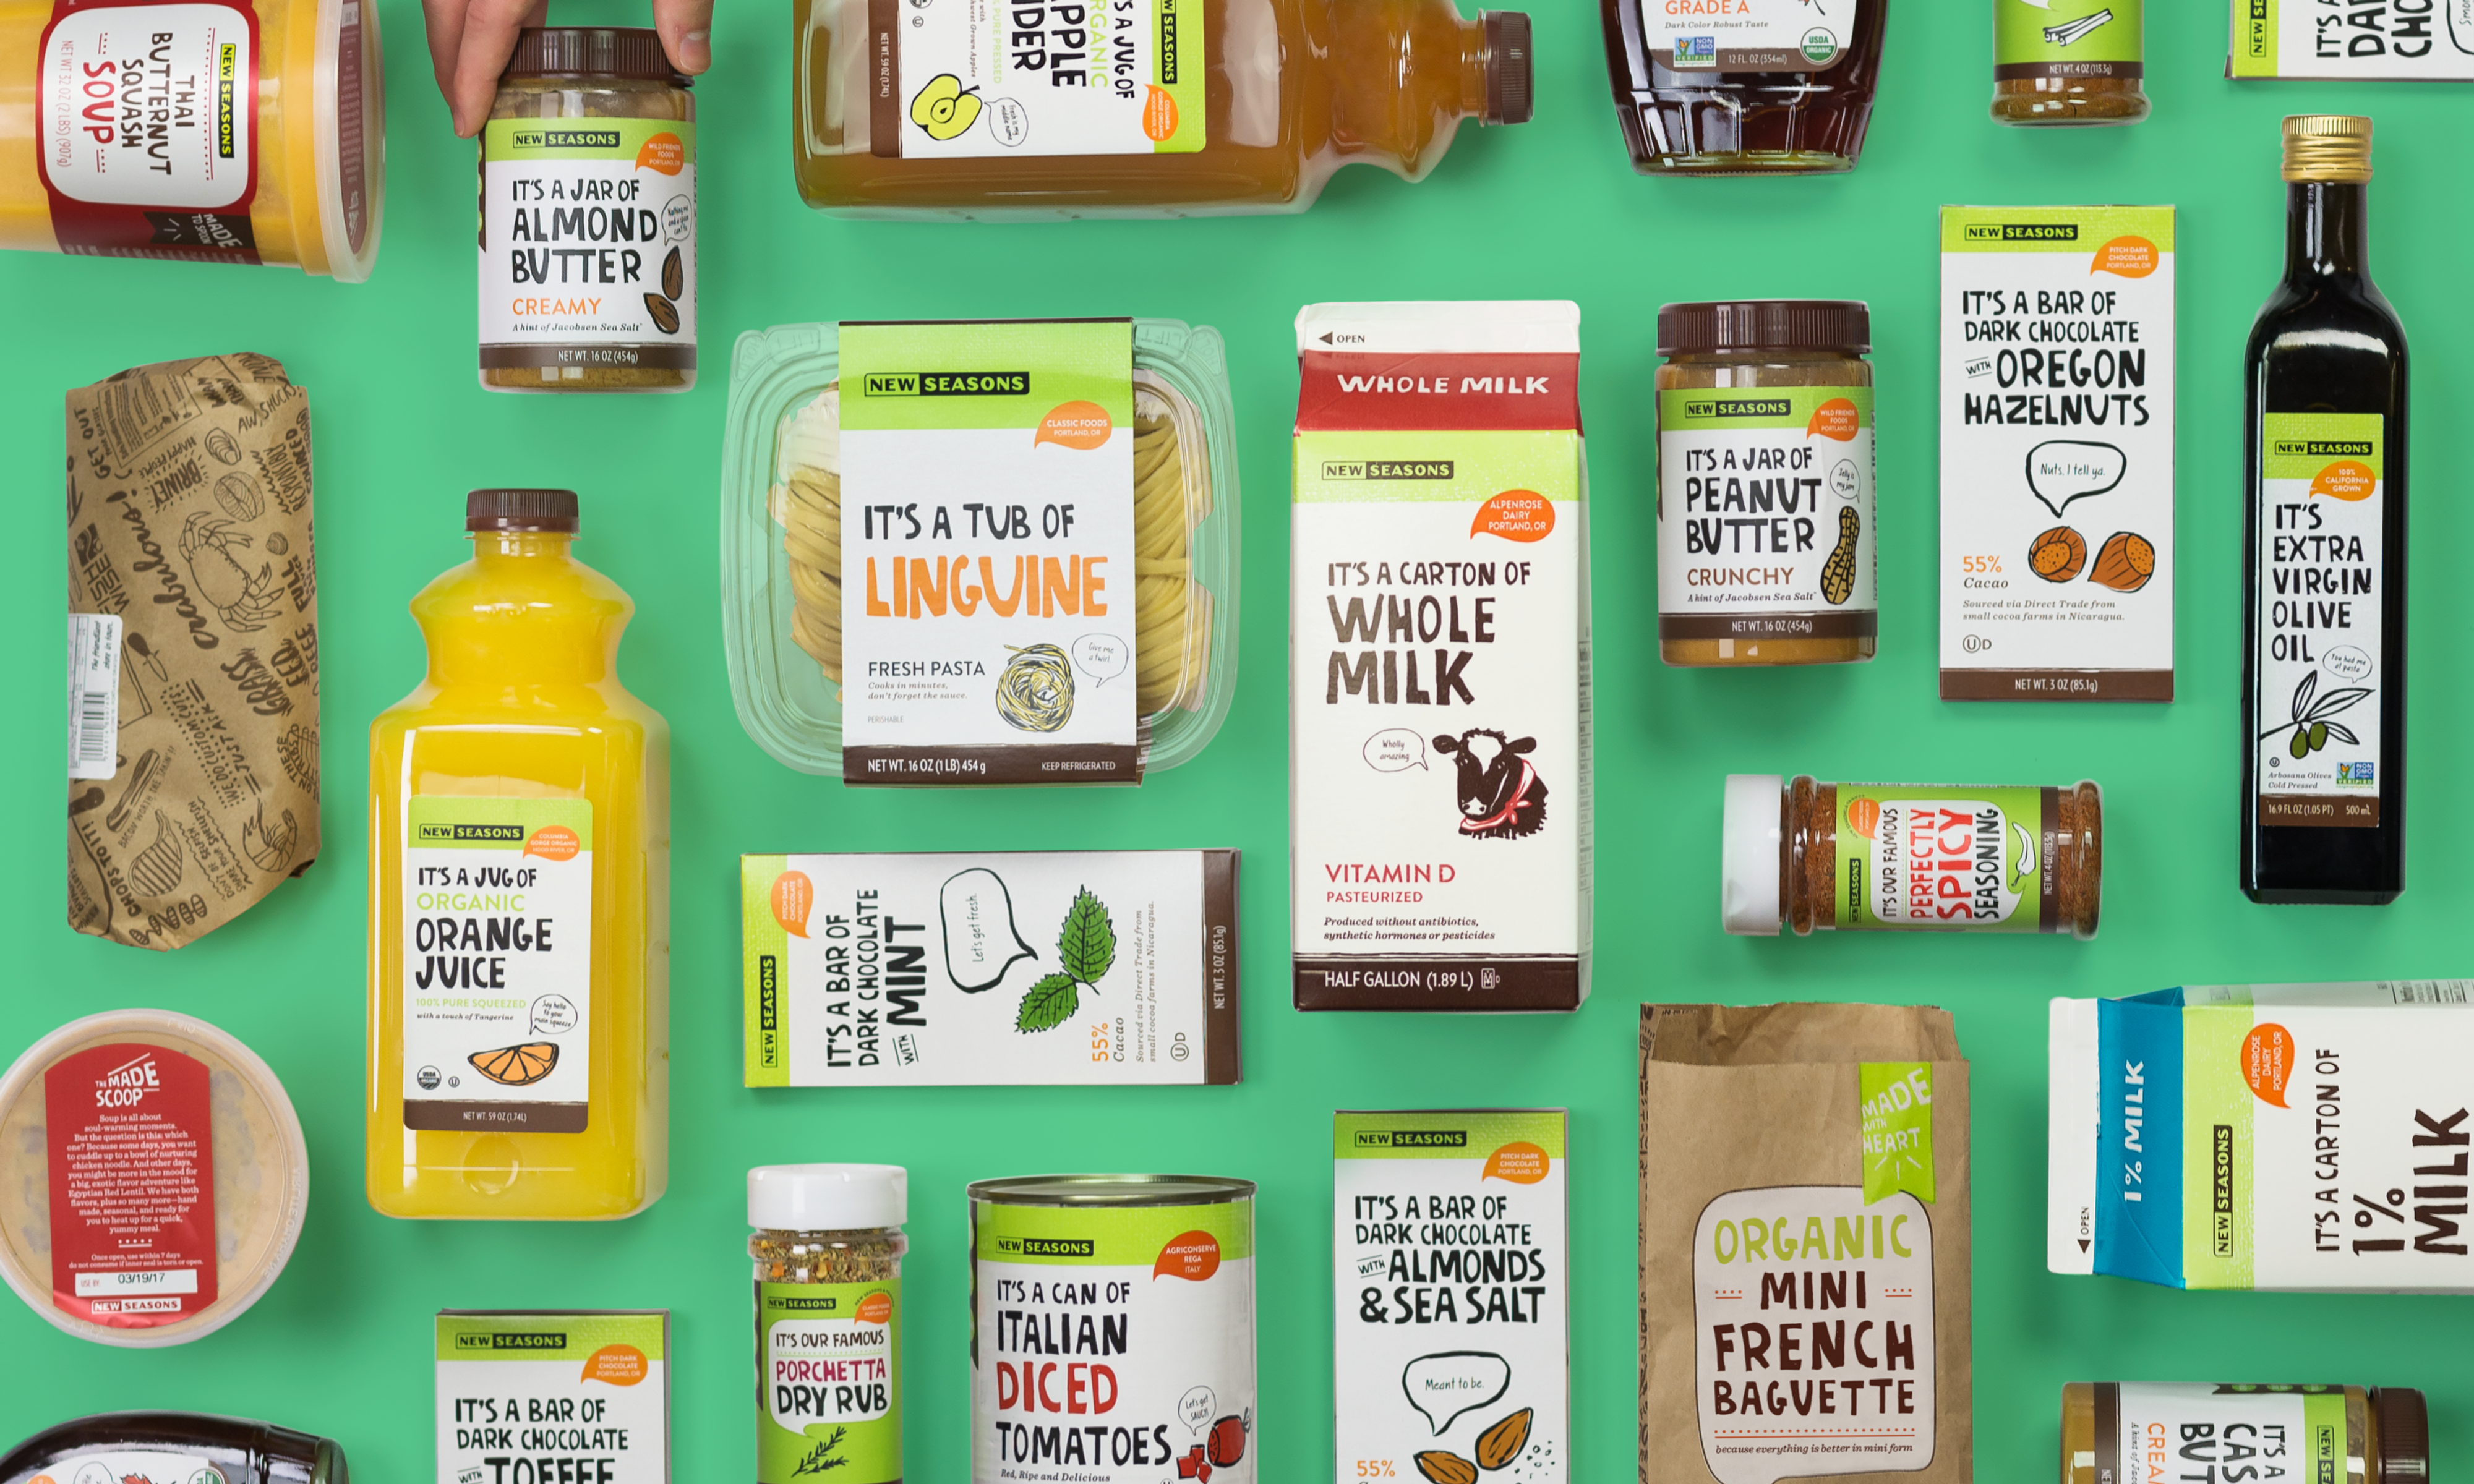 Several New Seasons products, including milk, orange juice, chocolate, spices, bread, and more placed neatly next to each other horizontally and vertically on a green background